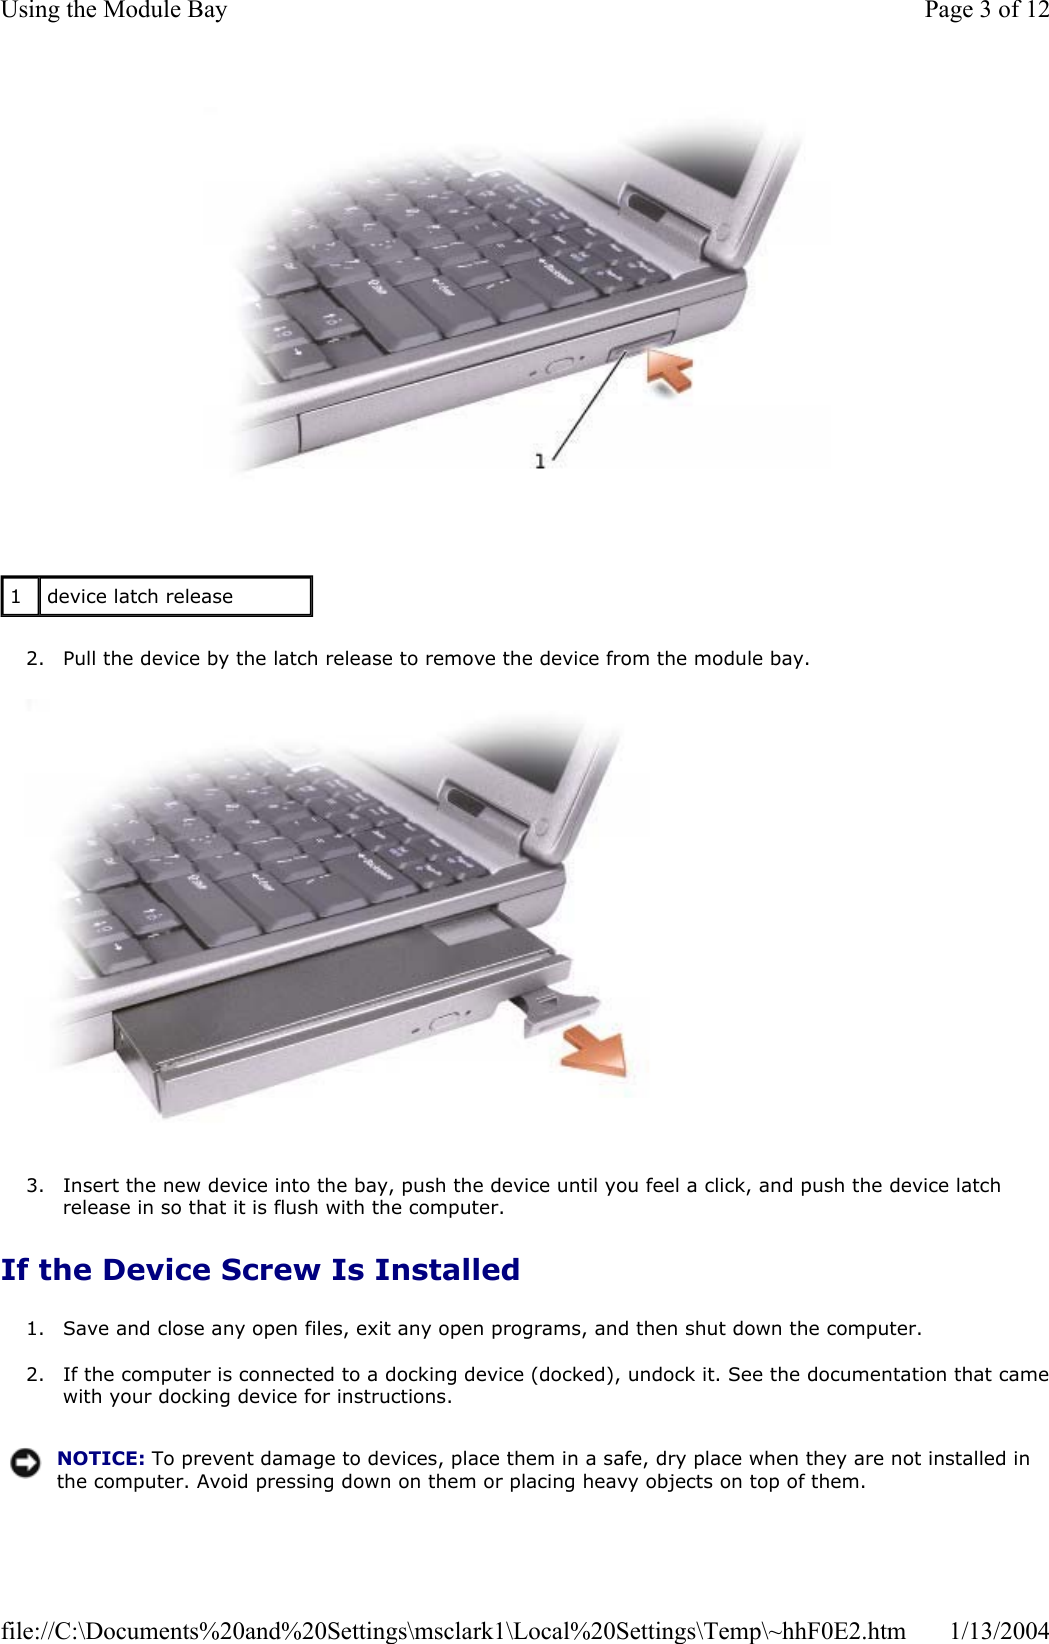 2. Pull the device by the latch release to remove the device from the module bay. 3. Insert the new device into the bay, push the device until you feel a click, and push the device latch release in so that it is flush with the computer. If the Device Screw Is Installed 1. Save and close any open files, exit any open programs, and then shut down the computer. 2. If the computer is connected to a docking device (docked), undock it. See the documentation that camewith your docking device for instructions. 1device latch release NOTICE: To prevent damage to devices, place them in a safe, dry place when they are not installed in the computer. Avoid pressing down on them or placing heavy objects on top of them.Page 3 of 12Using the Module Bay1/13/2004file://C:\Documents%20and%20Settings\msclark1\Local%20Settings\Temp\~hhF0E2.htm